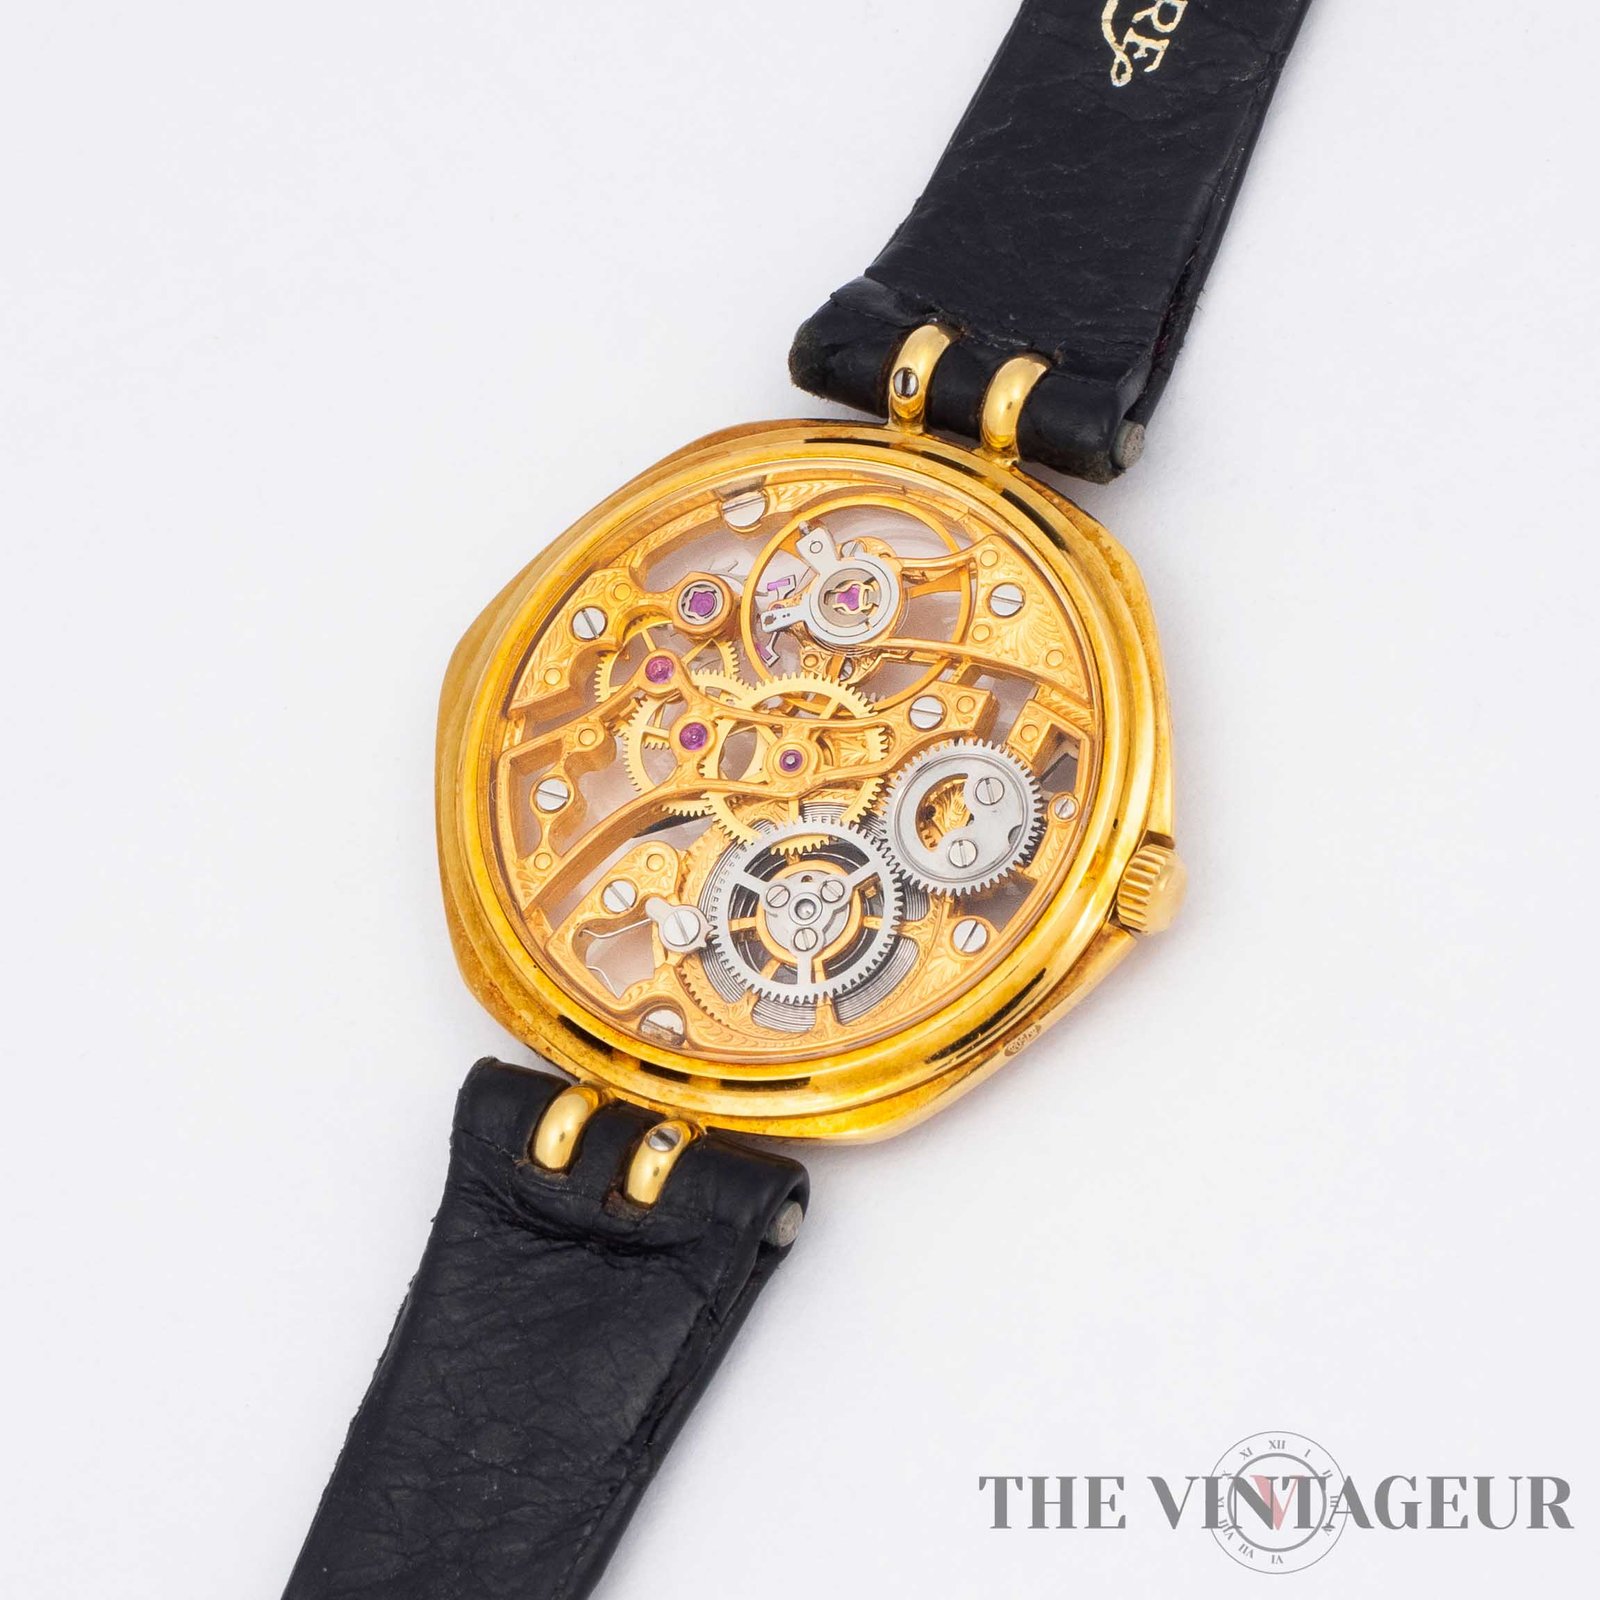 Sarcar - Skeleton - The Vintageur - Your bespoke watches collection - Collectible watch and watches and more-